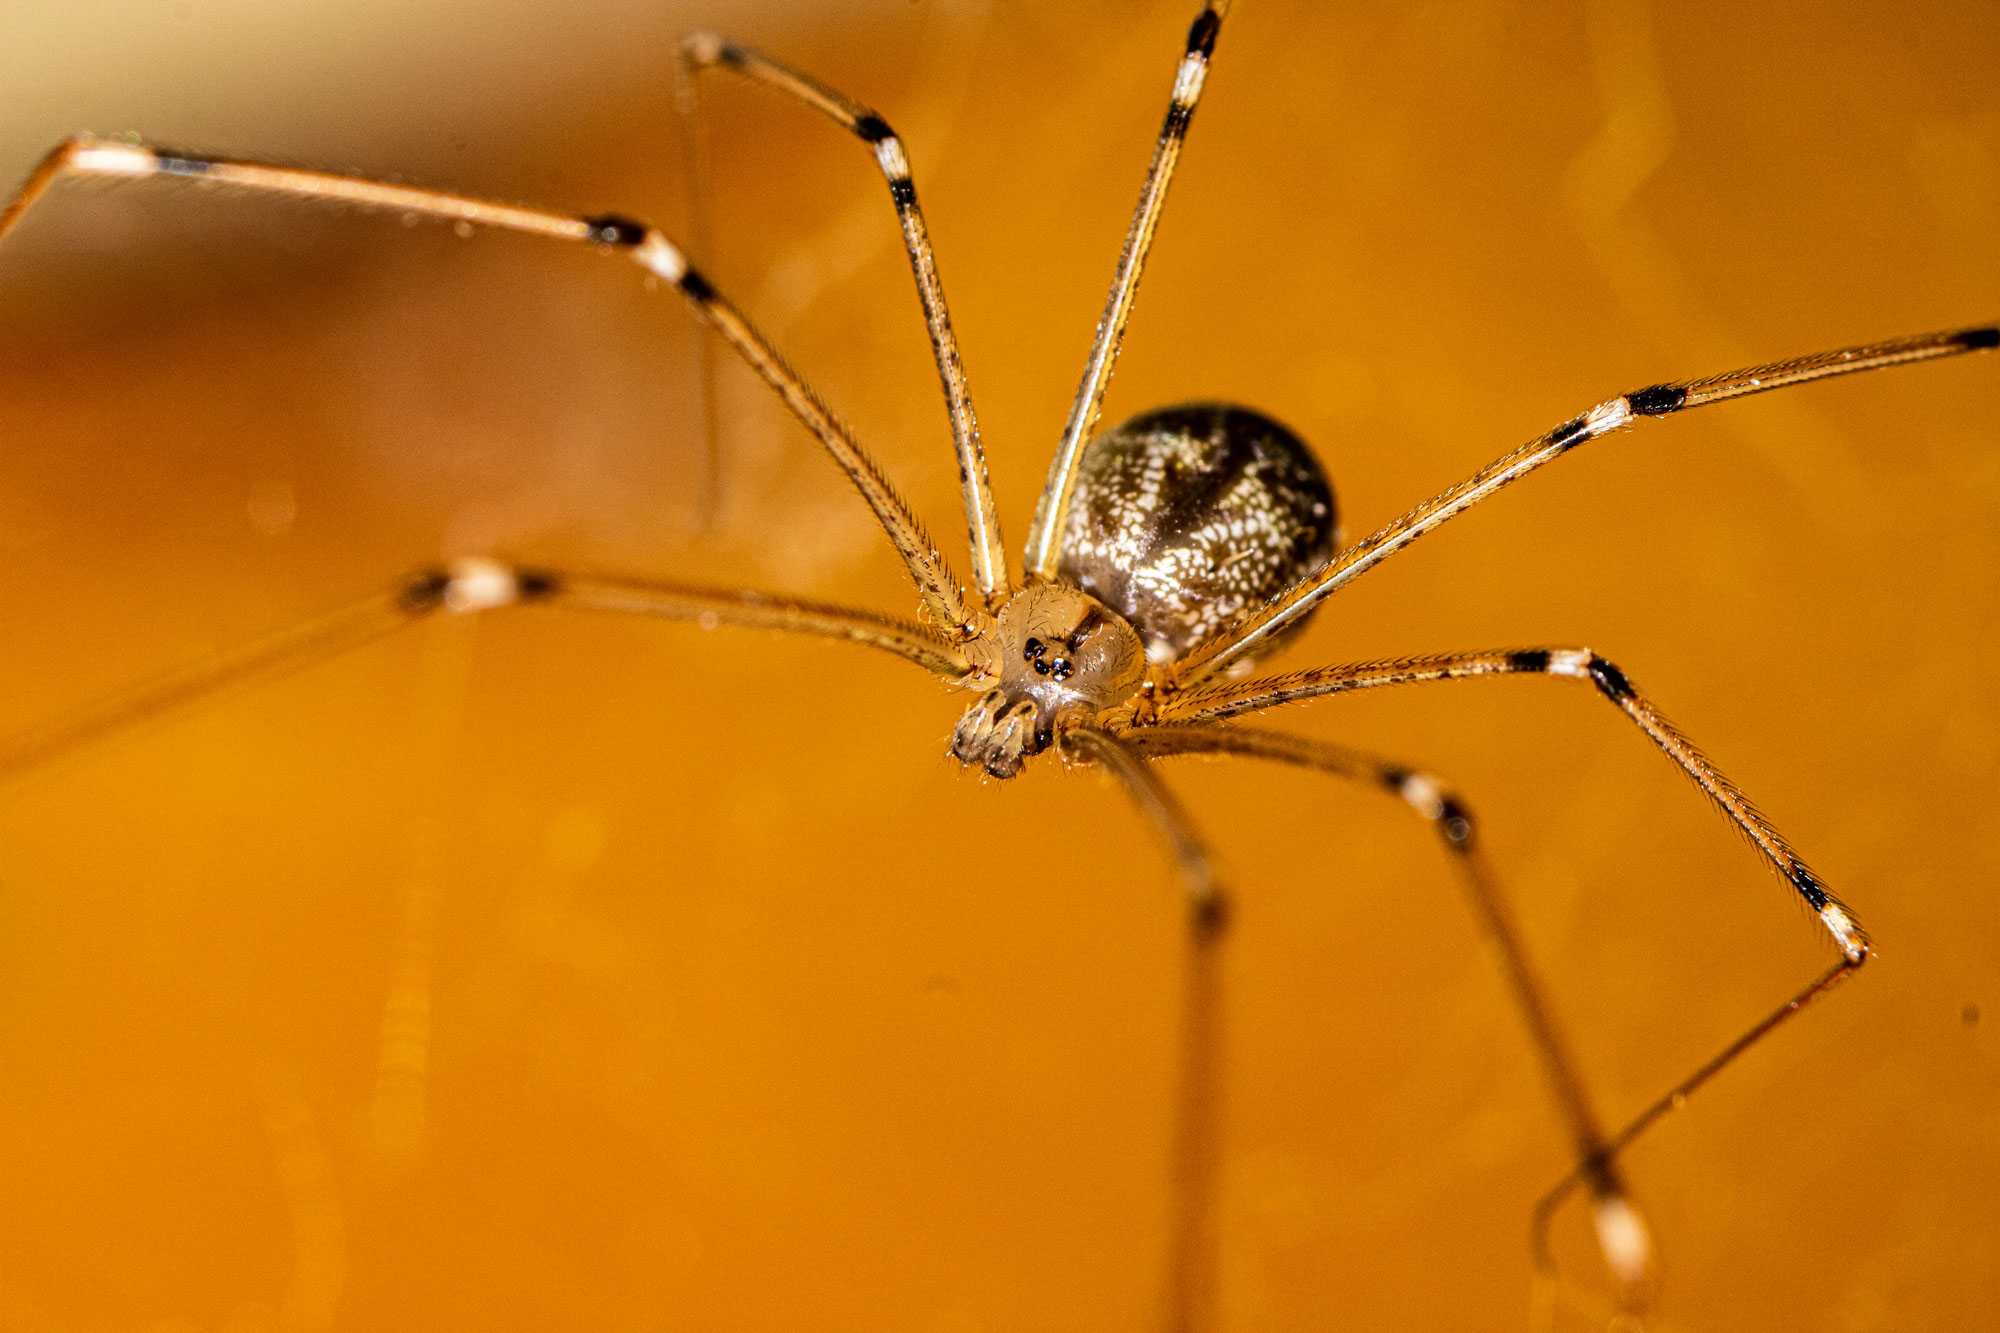 Myth buster: Daddy long legs are the most venomous spider in the